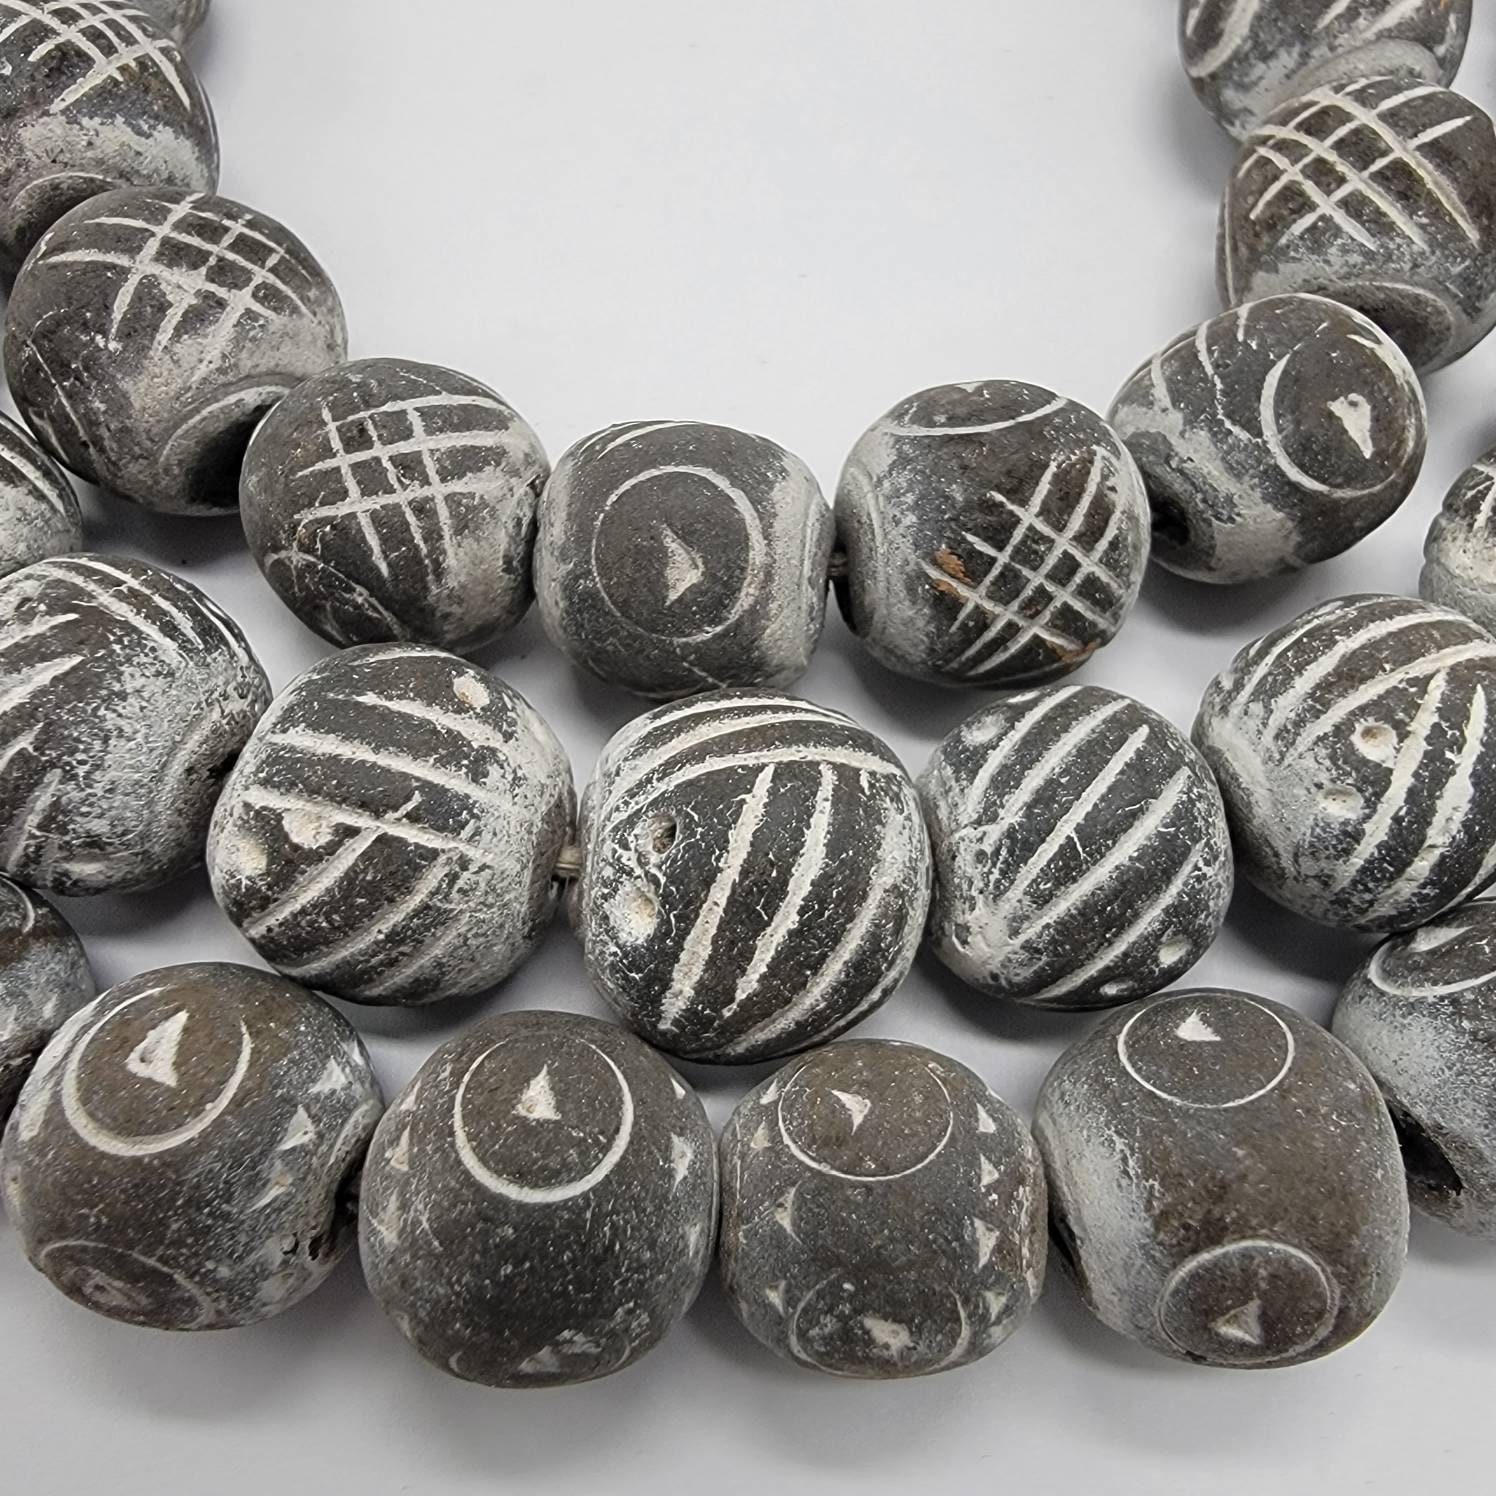 Vintage Ethnic African Tribal Clay Beads Black White 12 pcs